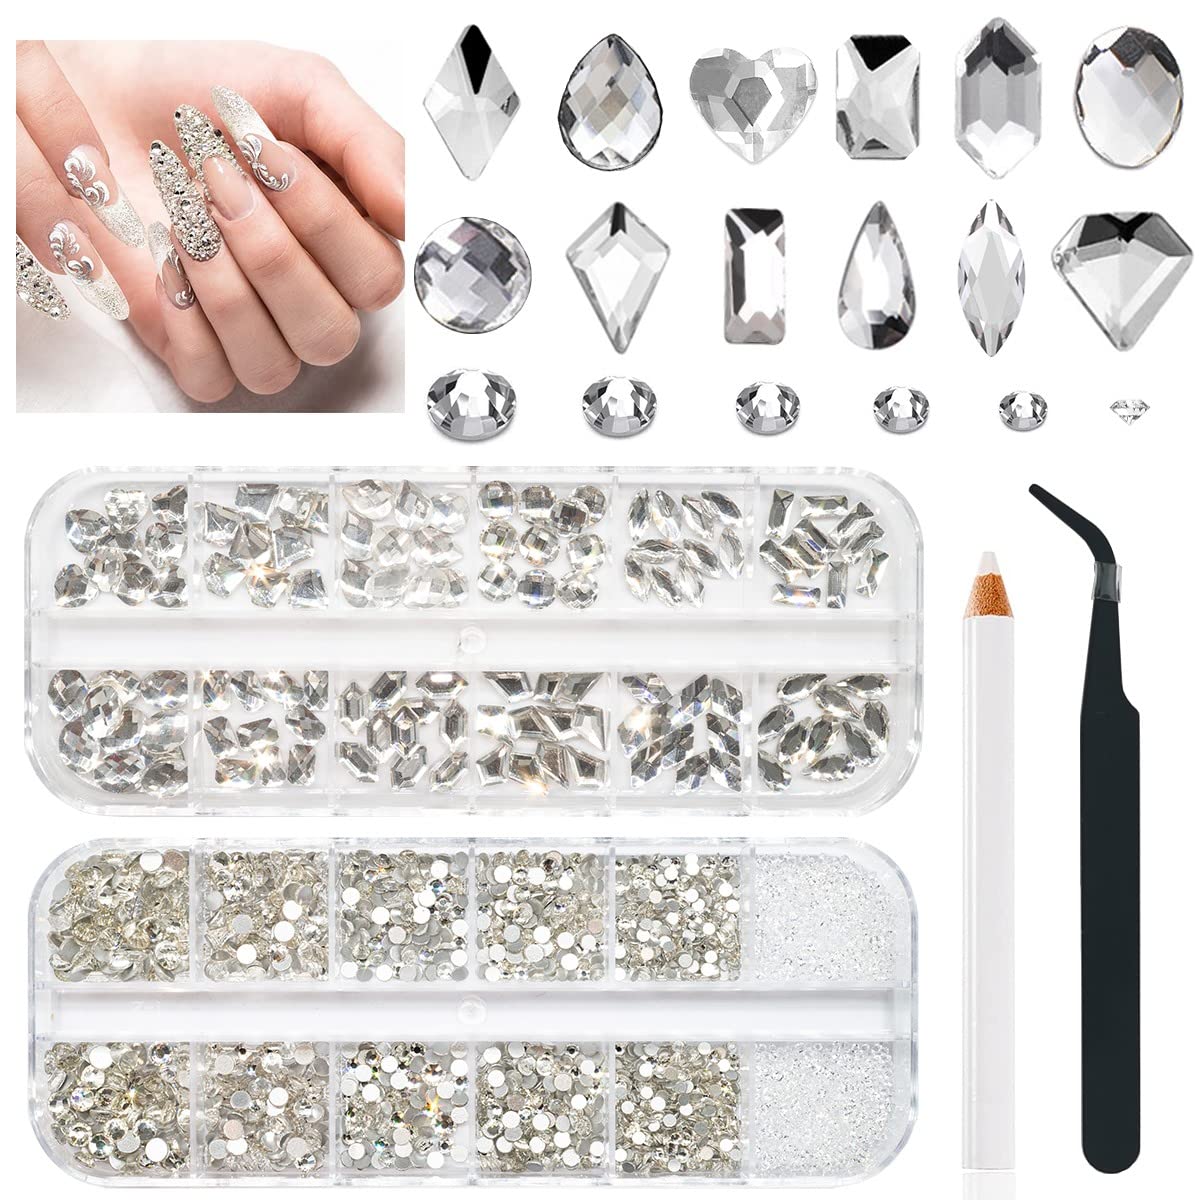 5A Fancy Stones and Crystals Small Rhinestones For Nails Art